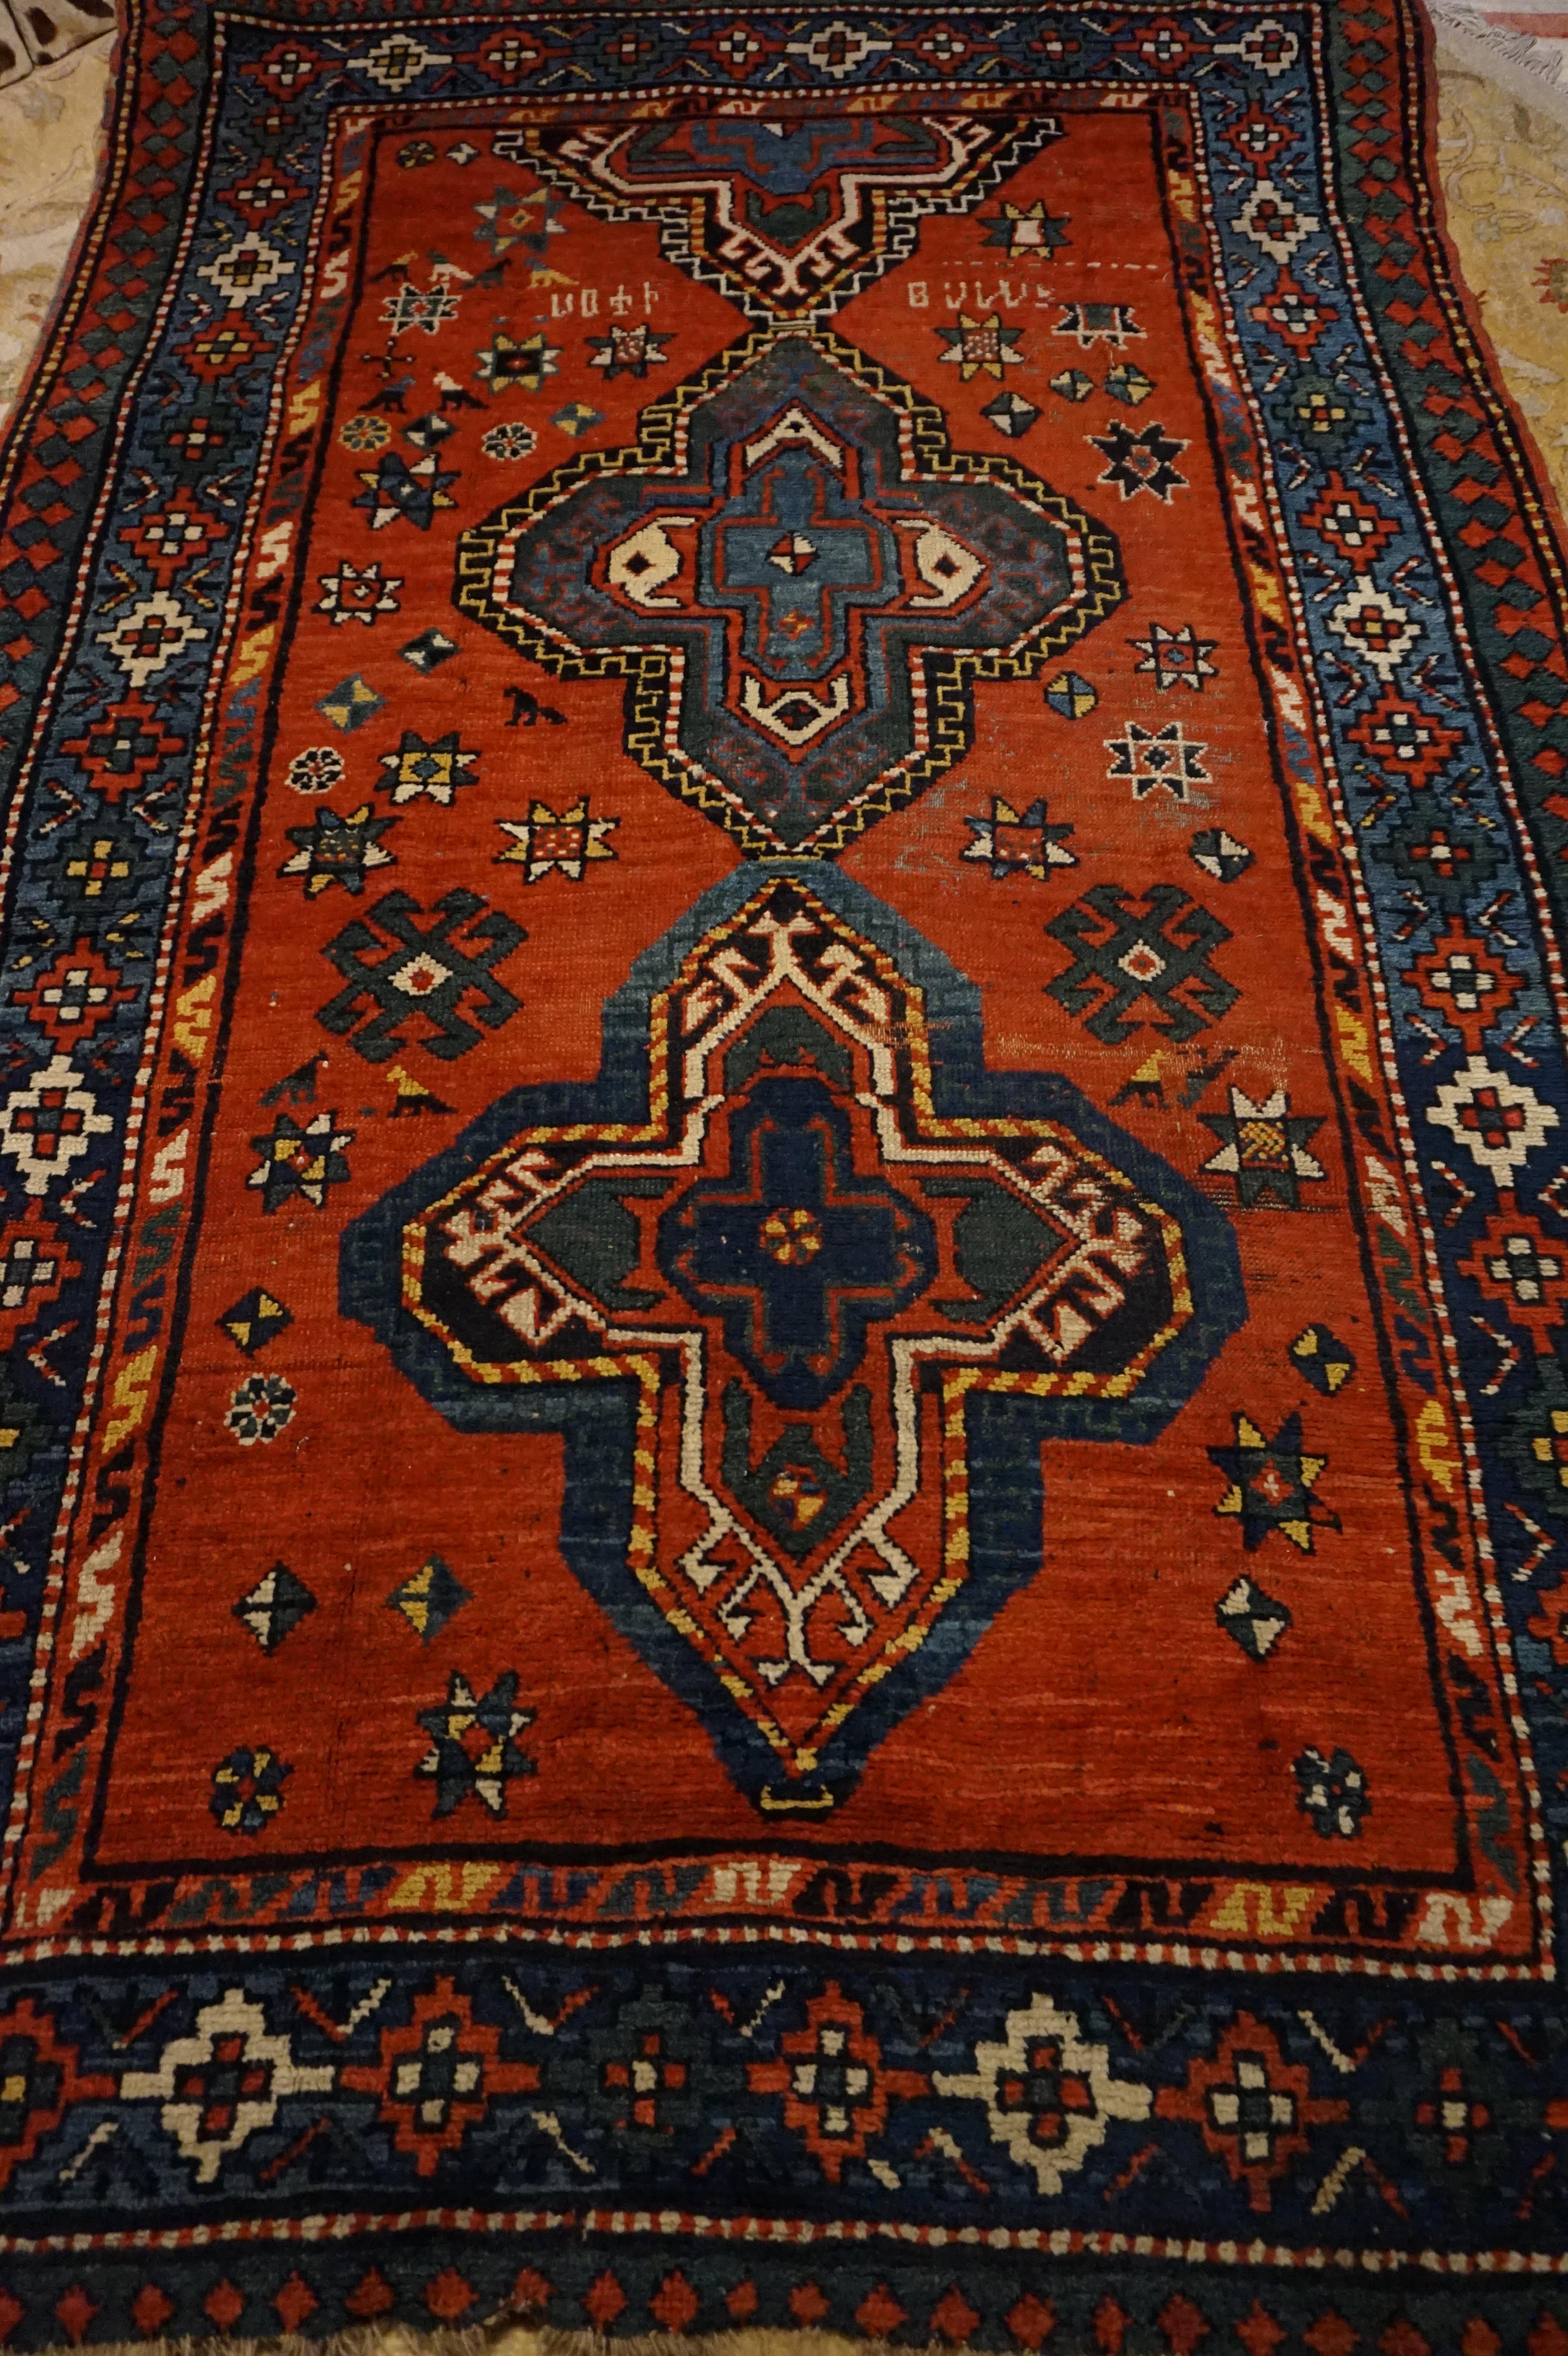 Charming rustic Caucasus region tribal village rug with vibrant natural hues and asymmetrical kite medallion pattern. Large open fields with signatures, star motifs and vibrant variegated colours make this rug exude warmth and character. The abrupt